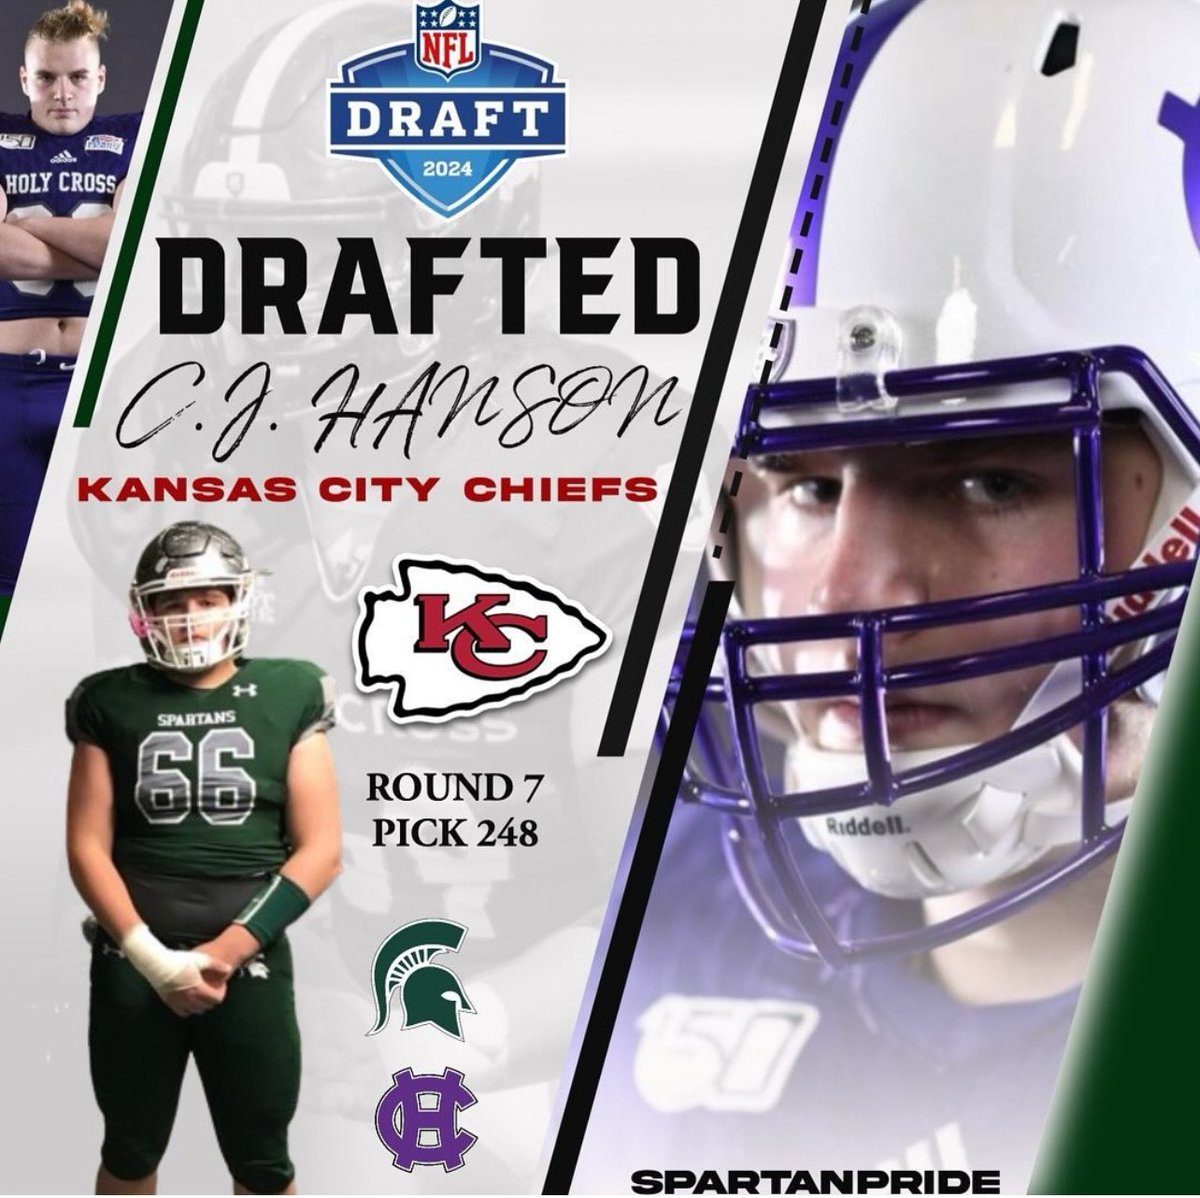 Proof, when you follow trust the process and work relentlessly your dreams do come true! Beyond proud of Spartan alum @chris330196 from Alps rd. to the @NFL #spartanpride